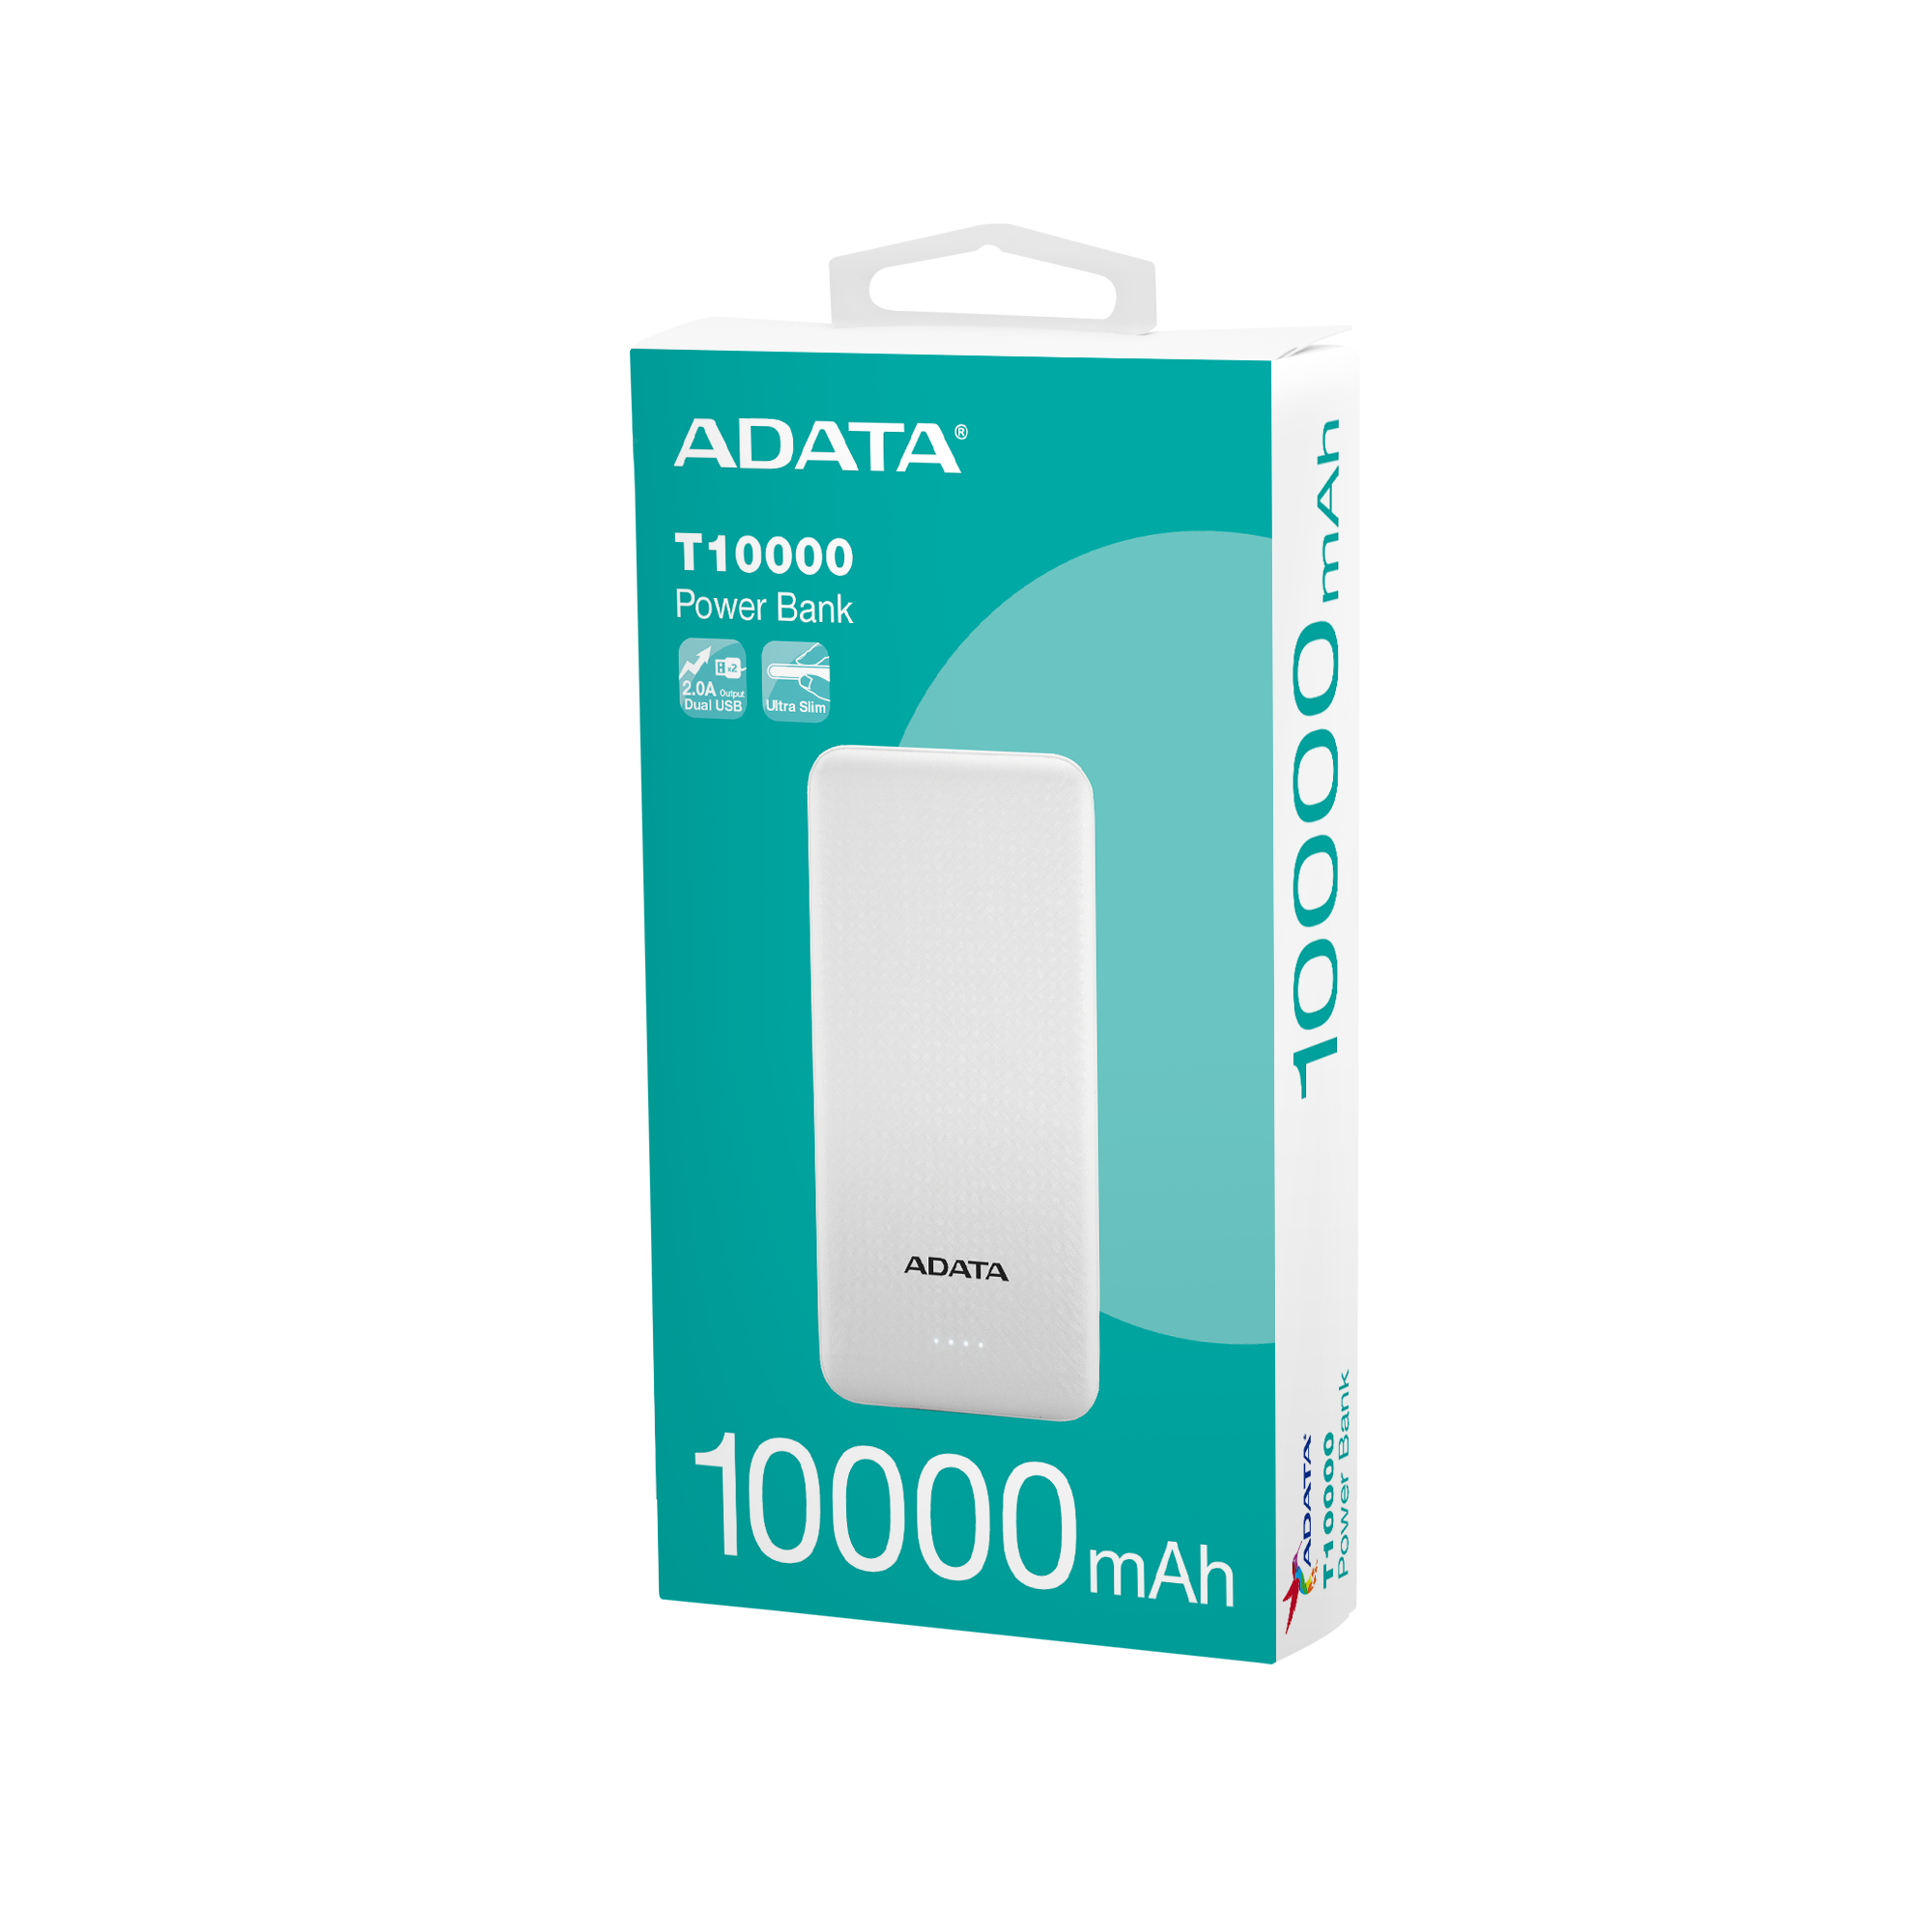 The slim and compact ADATA T10000 with 10,000mAh